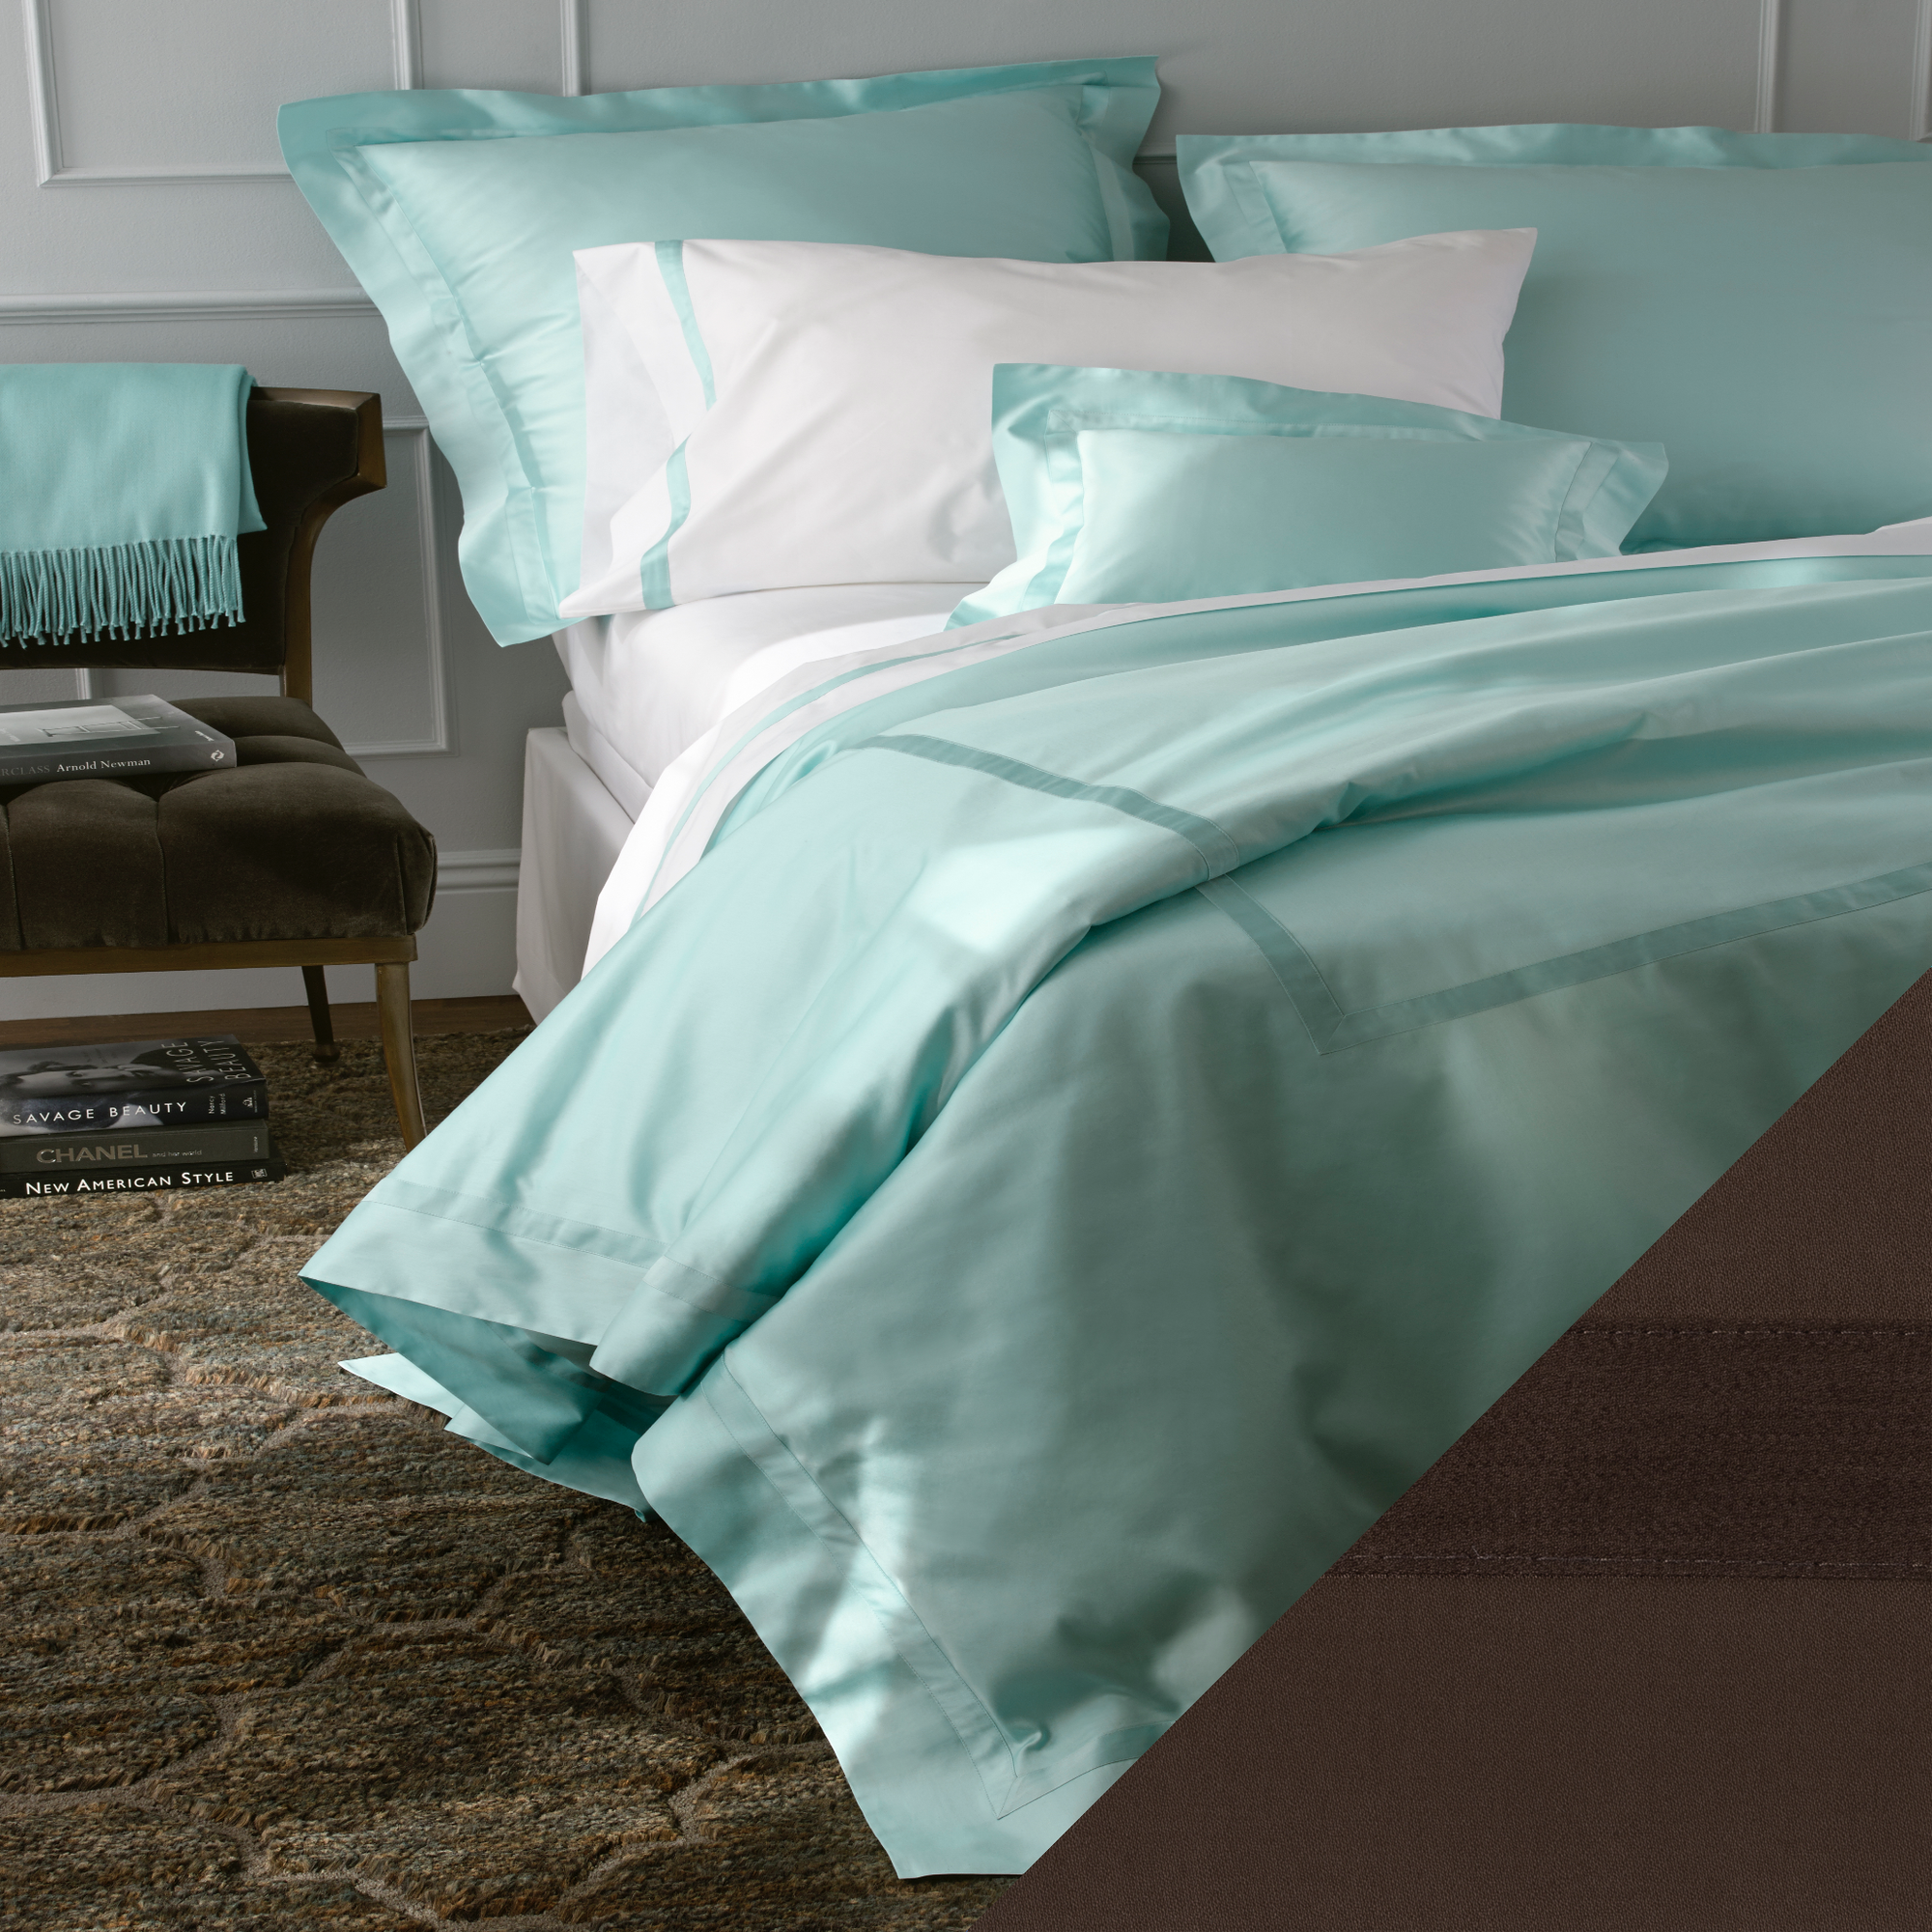 Matouk Nocturne Collection in Full Bedding with Sable Colored Swatch